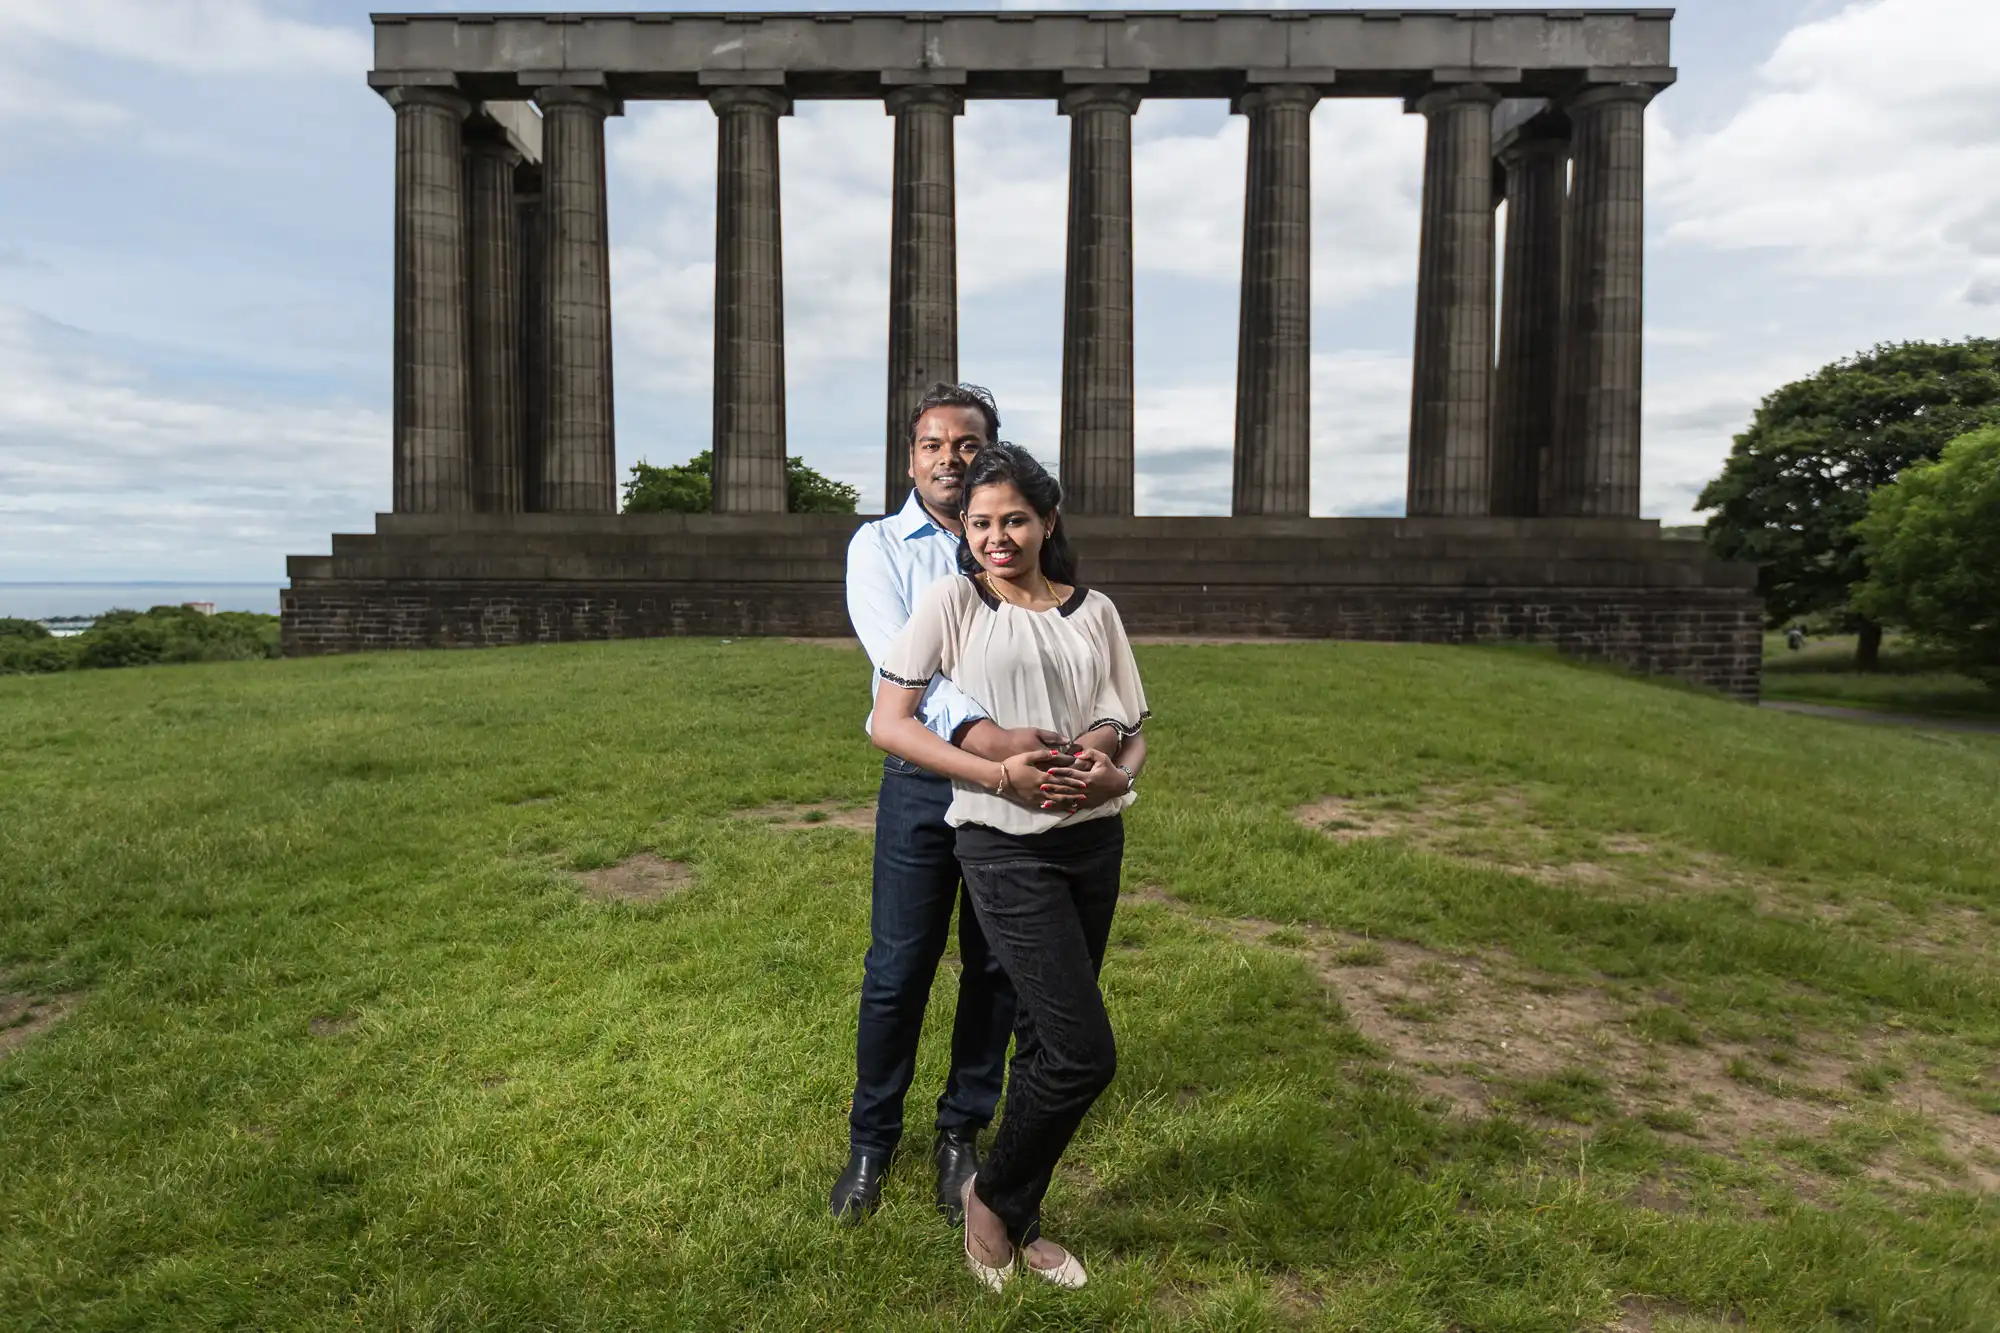 A couple stands closely together on a grassy area in front of a large neoclassical structure with columns on a partly cloudy day.